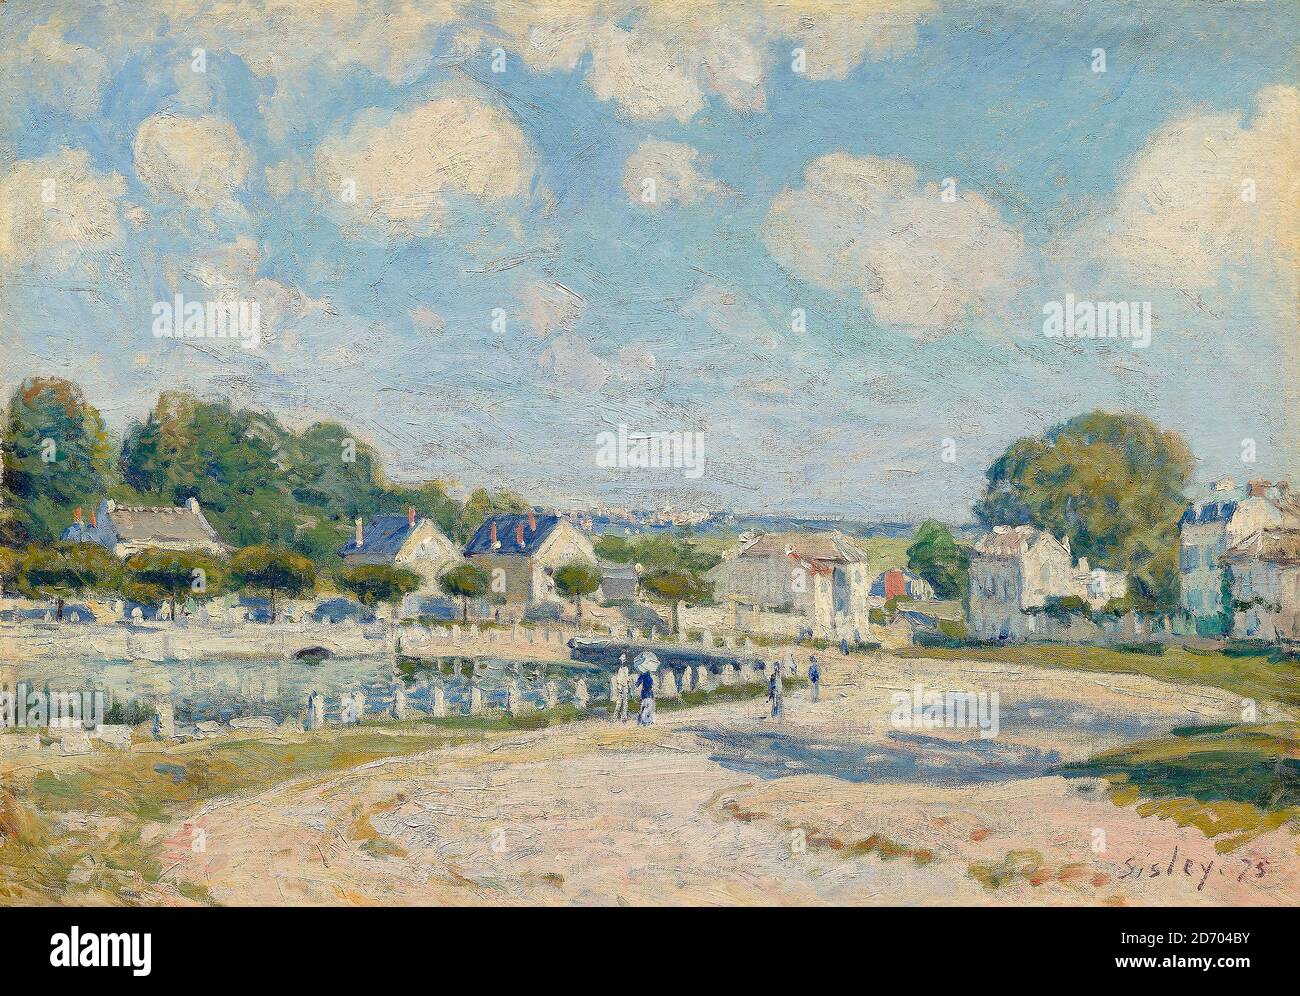 Alfred Sisley, Watering Place at Marly, landscape painting, 1875 Stock Photo